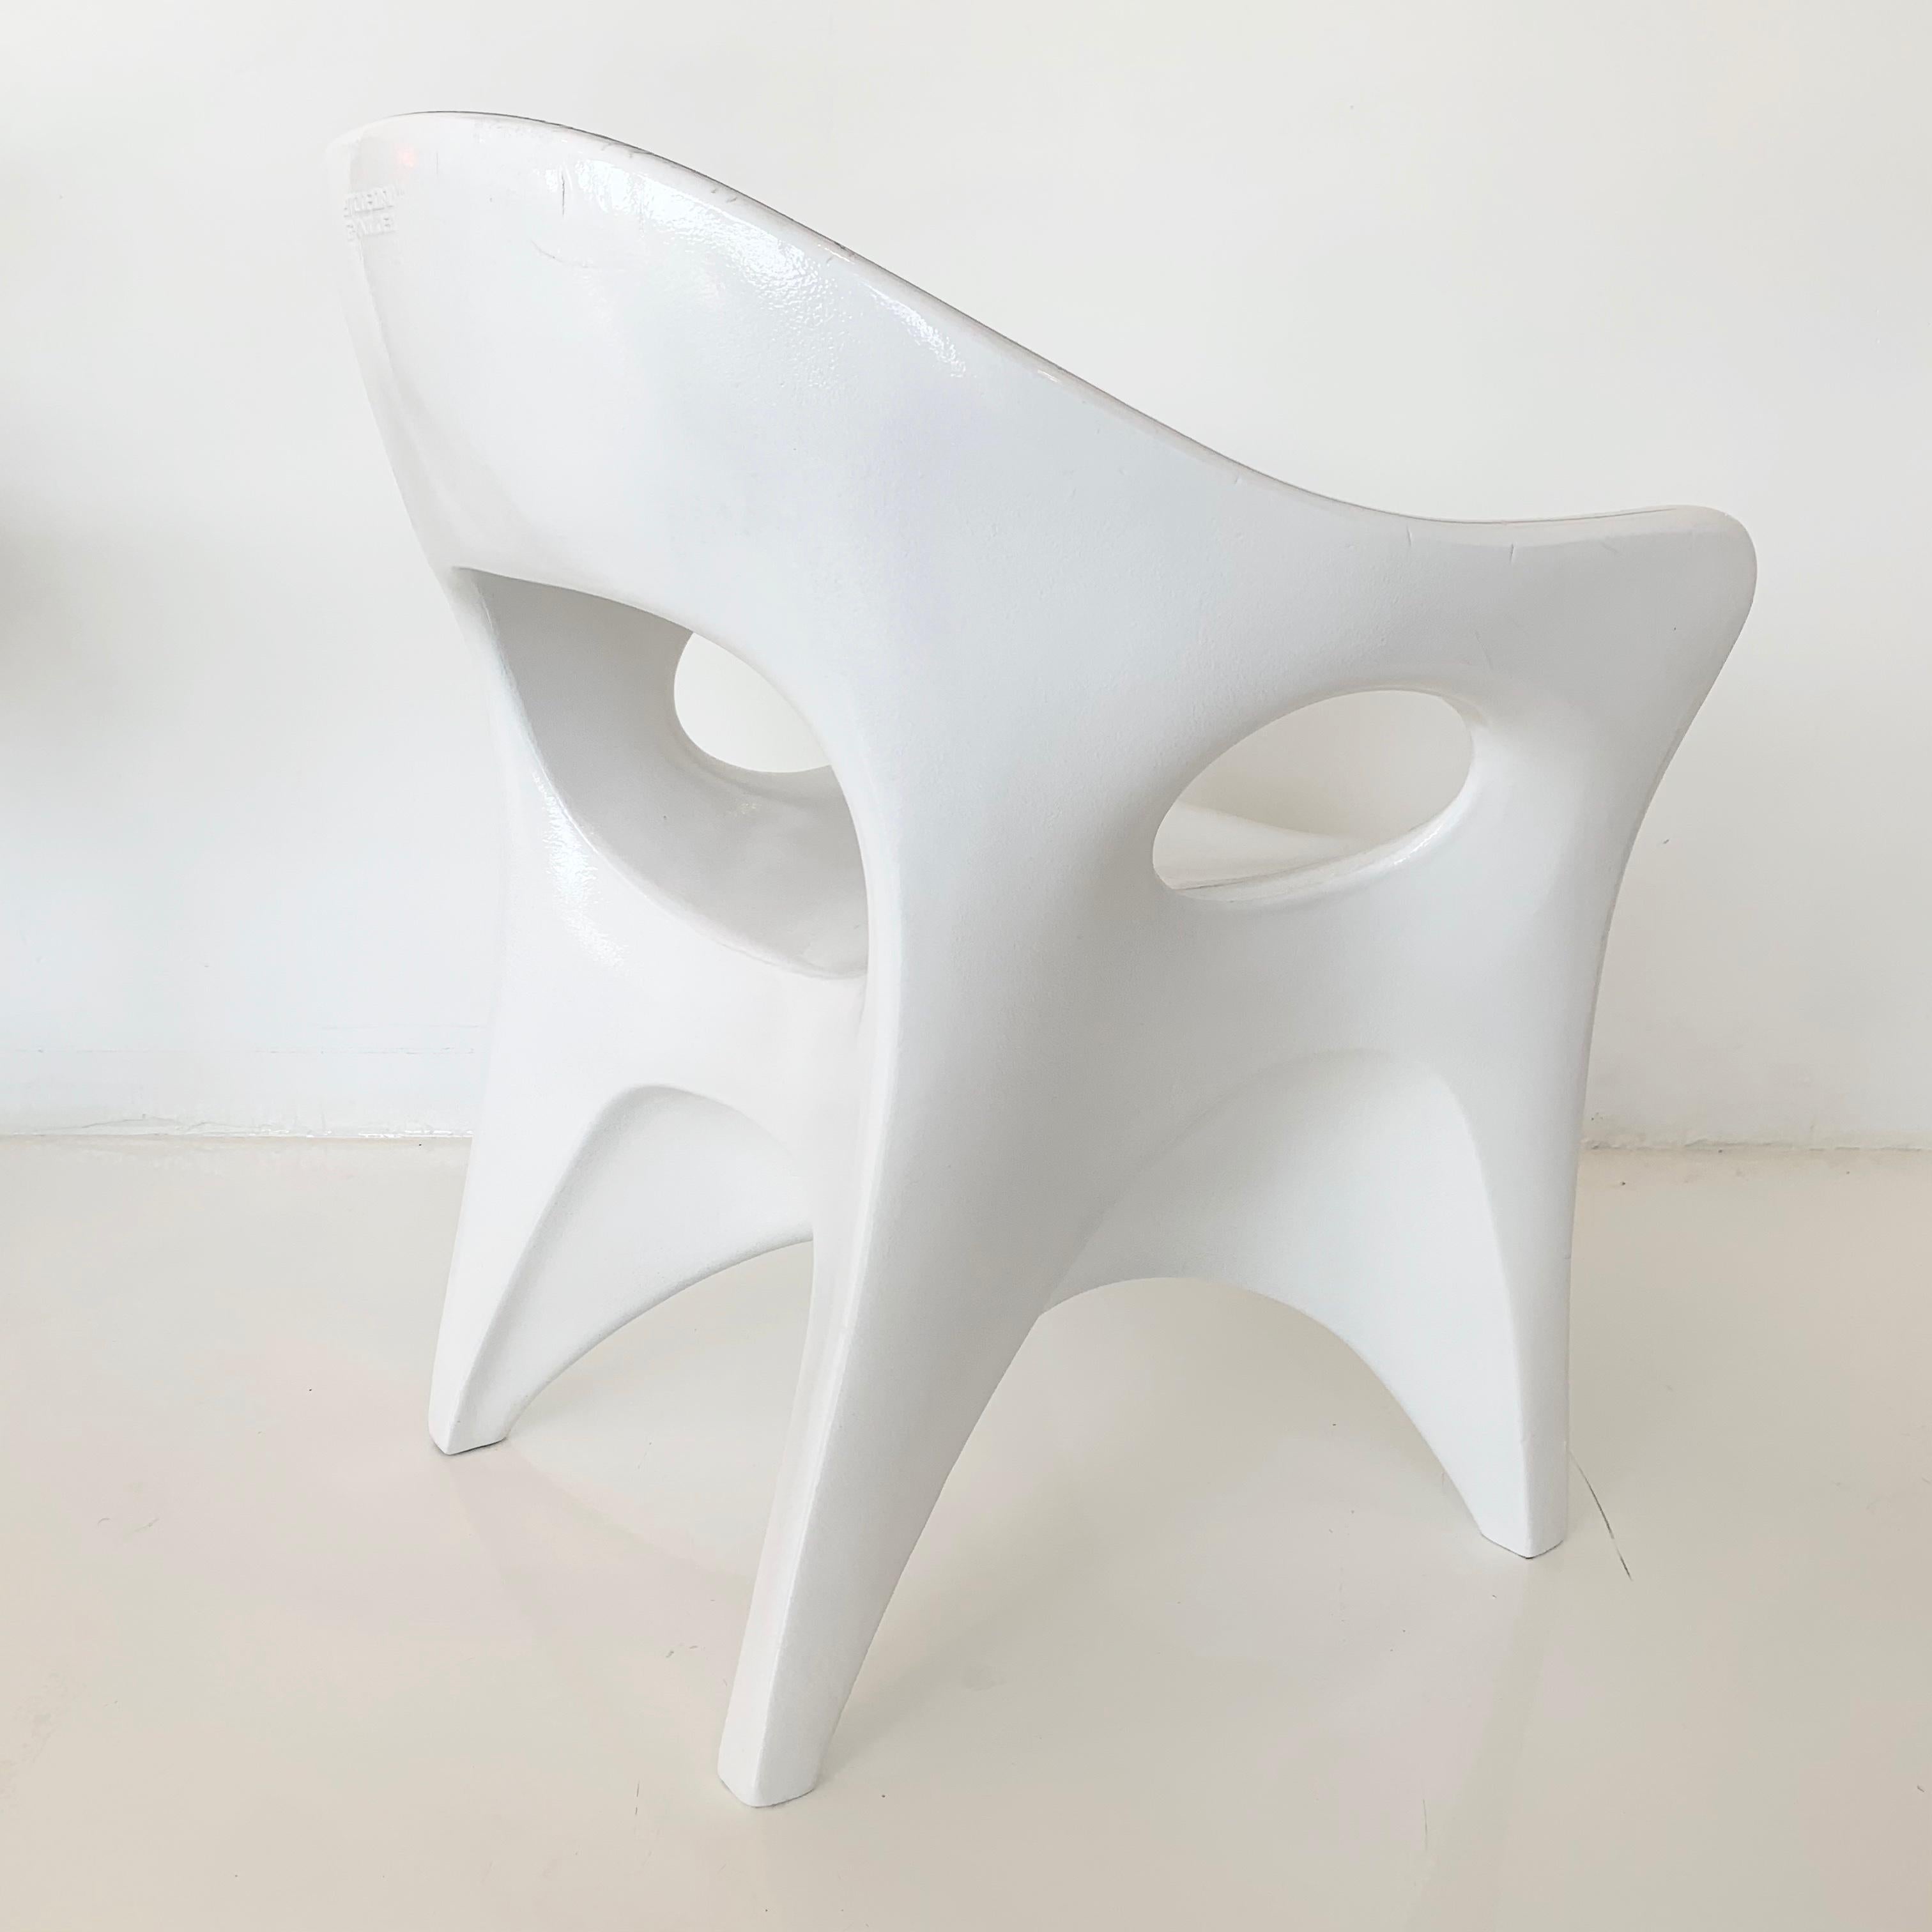 Set of 4 Sculptural Plastic Chairs by John Gale, 1963 For Sale 3